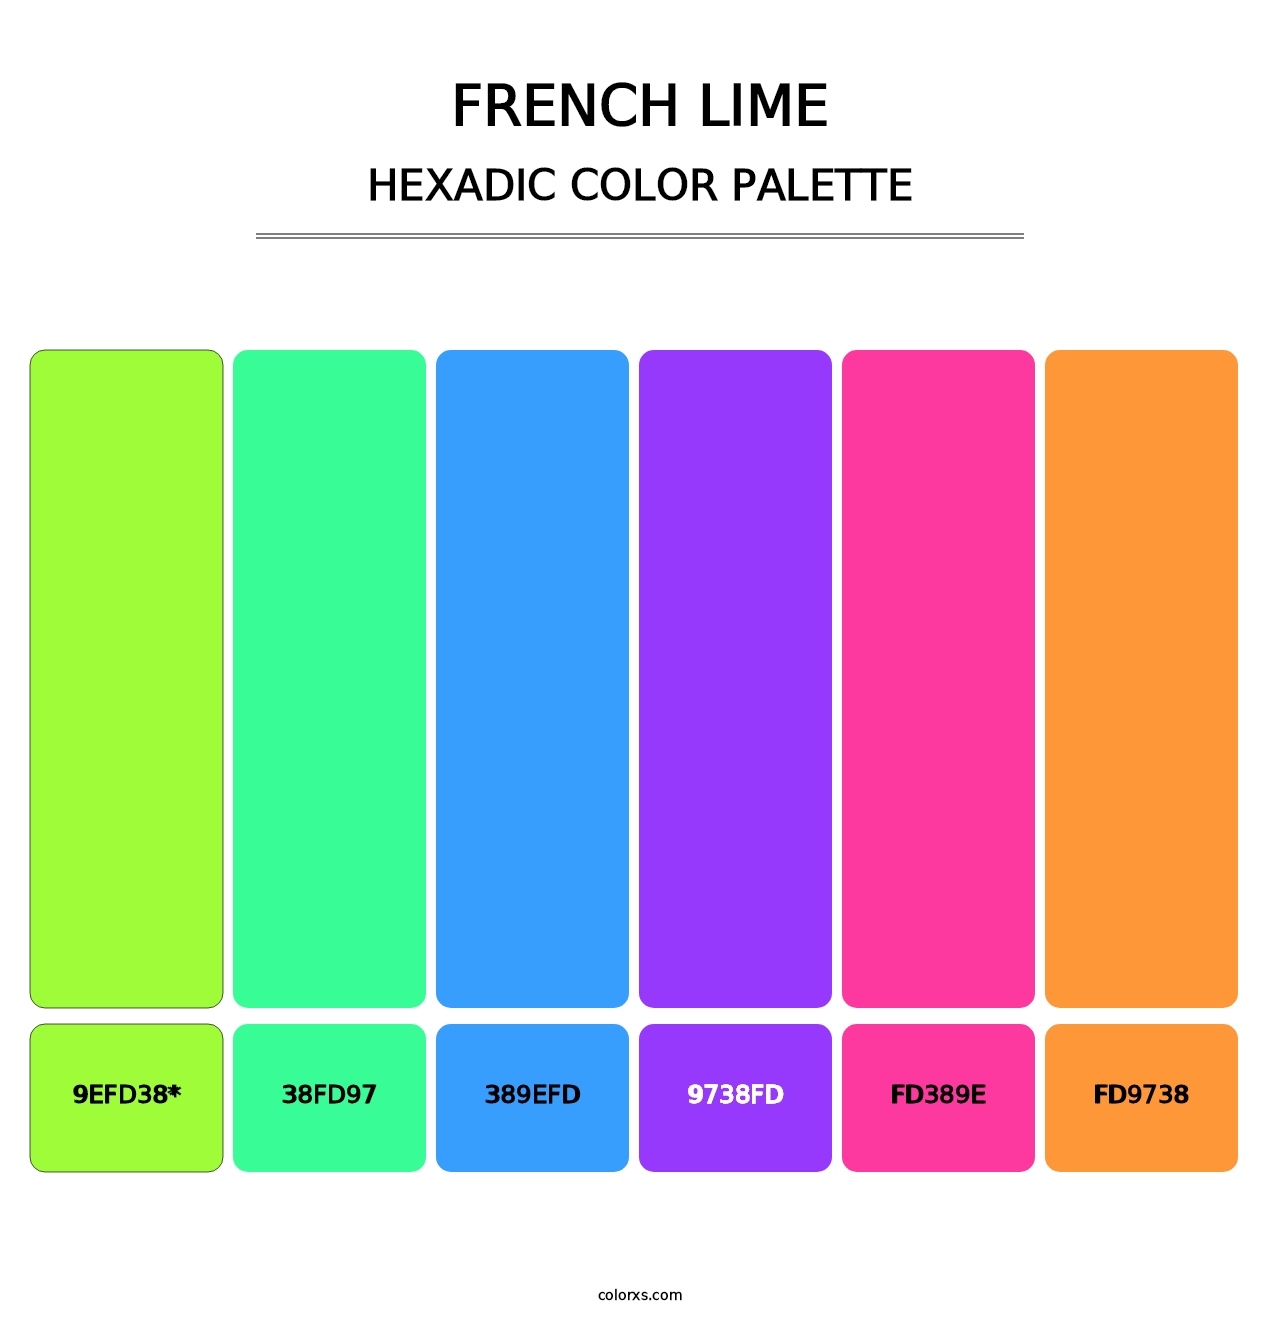 French Lime - Hexadic Color Palette